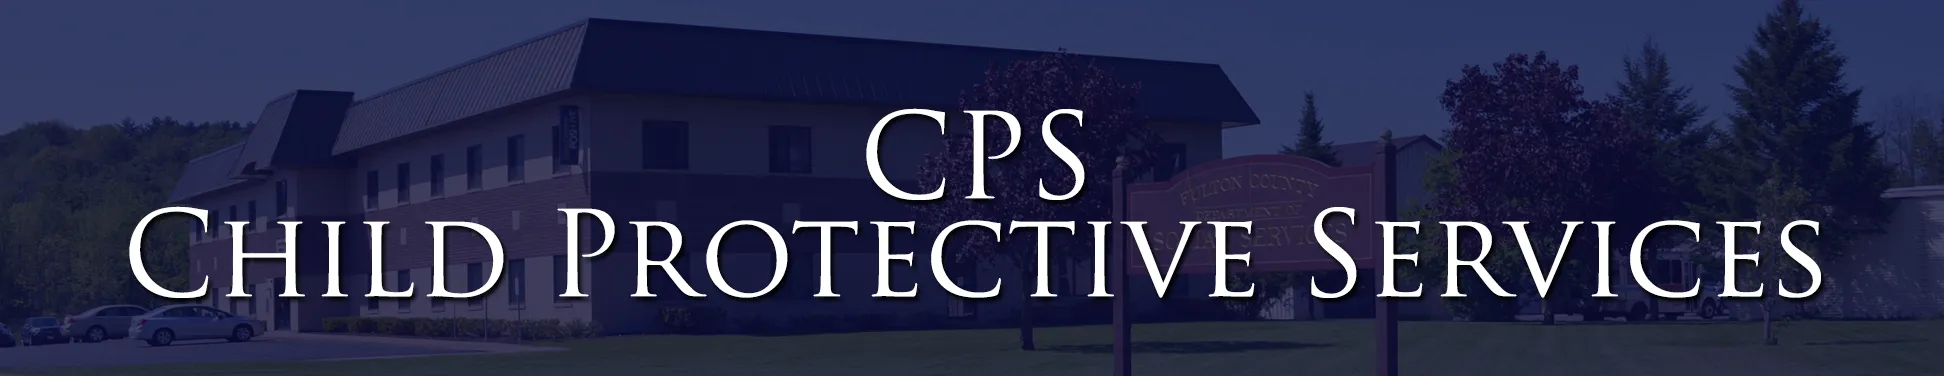 Department of Social Services - Child Protective Services (CPS)